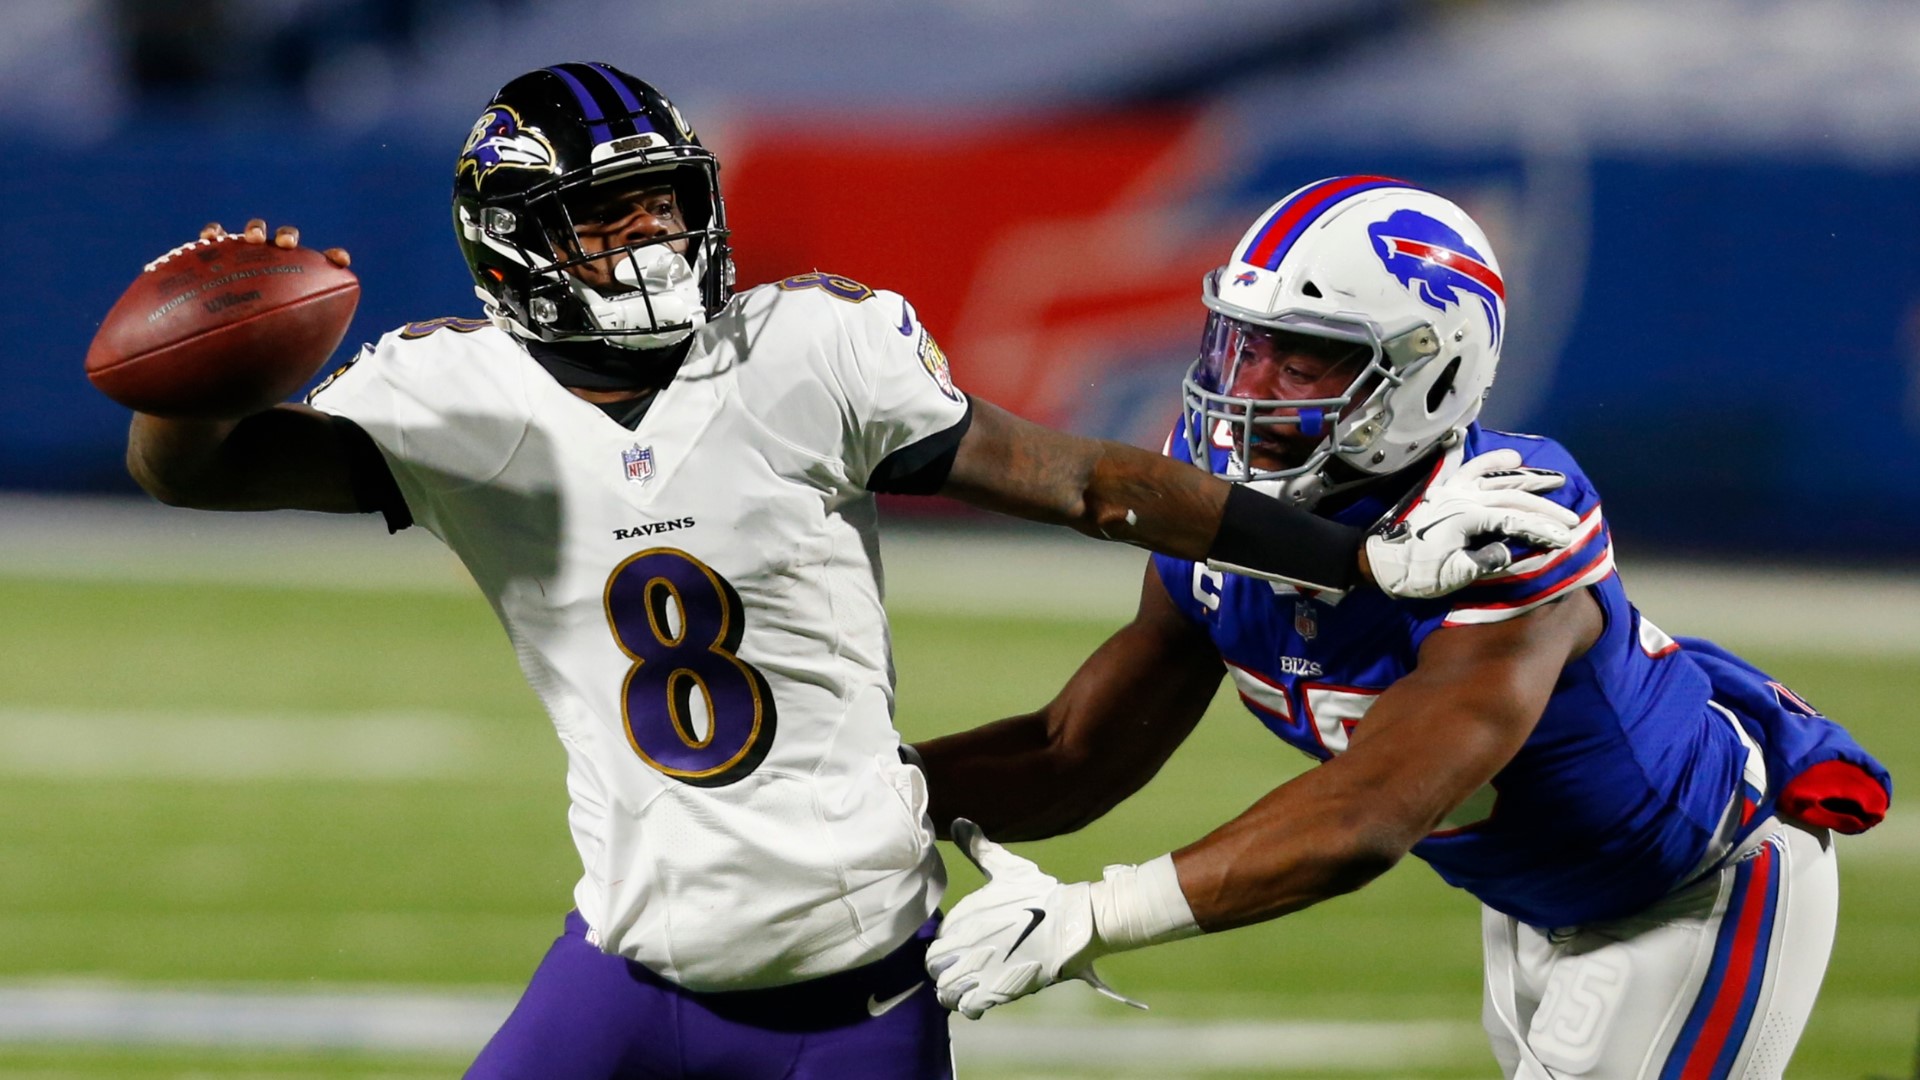 Bills Mafia raised more than $360,000 for Lamar Jackson's favorite Louisville-based charity following the team's win over the Ravens.